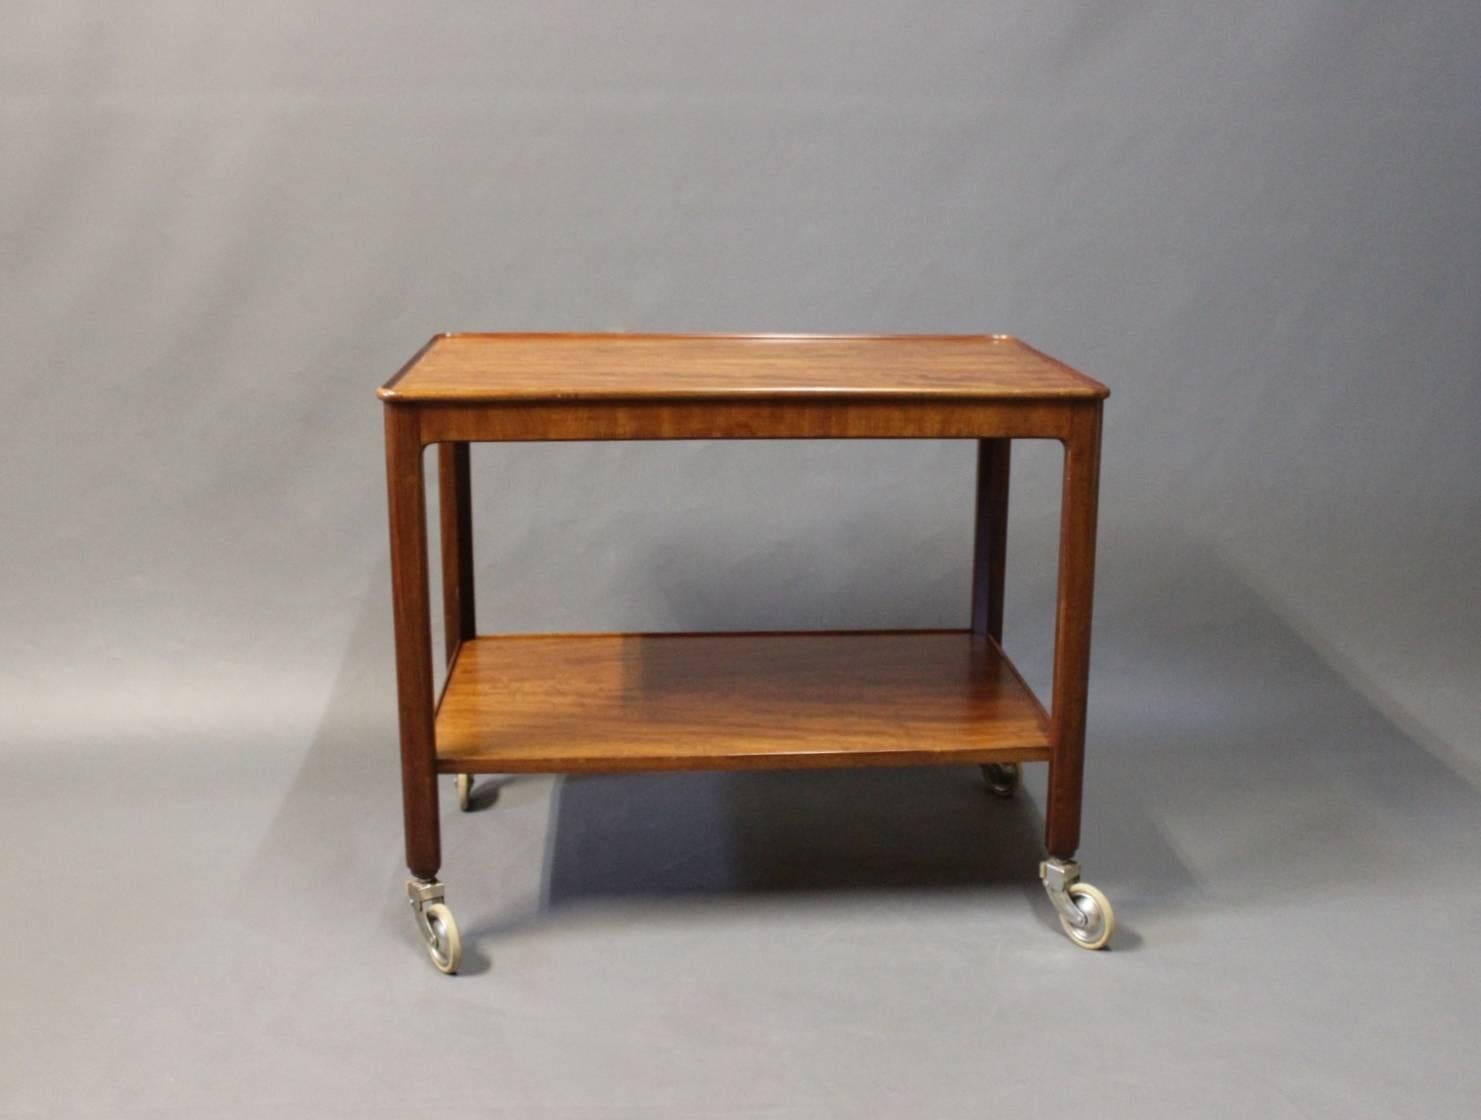 Tray table in mahogany with rounded edge of Danish design from the 1960s. The tray table is in great vintage condition.